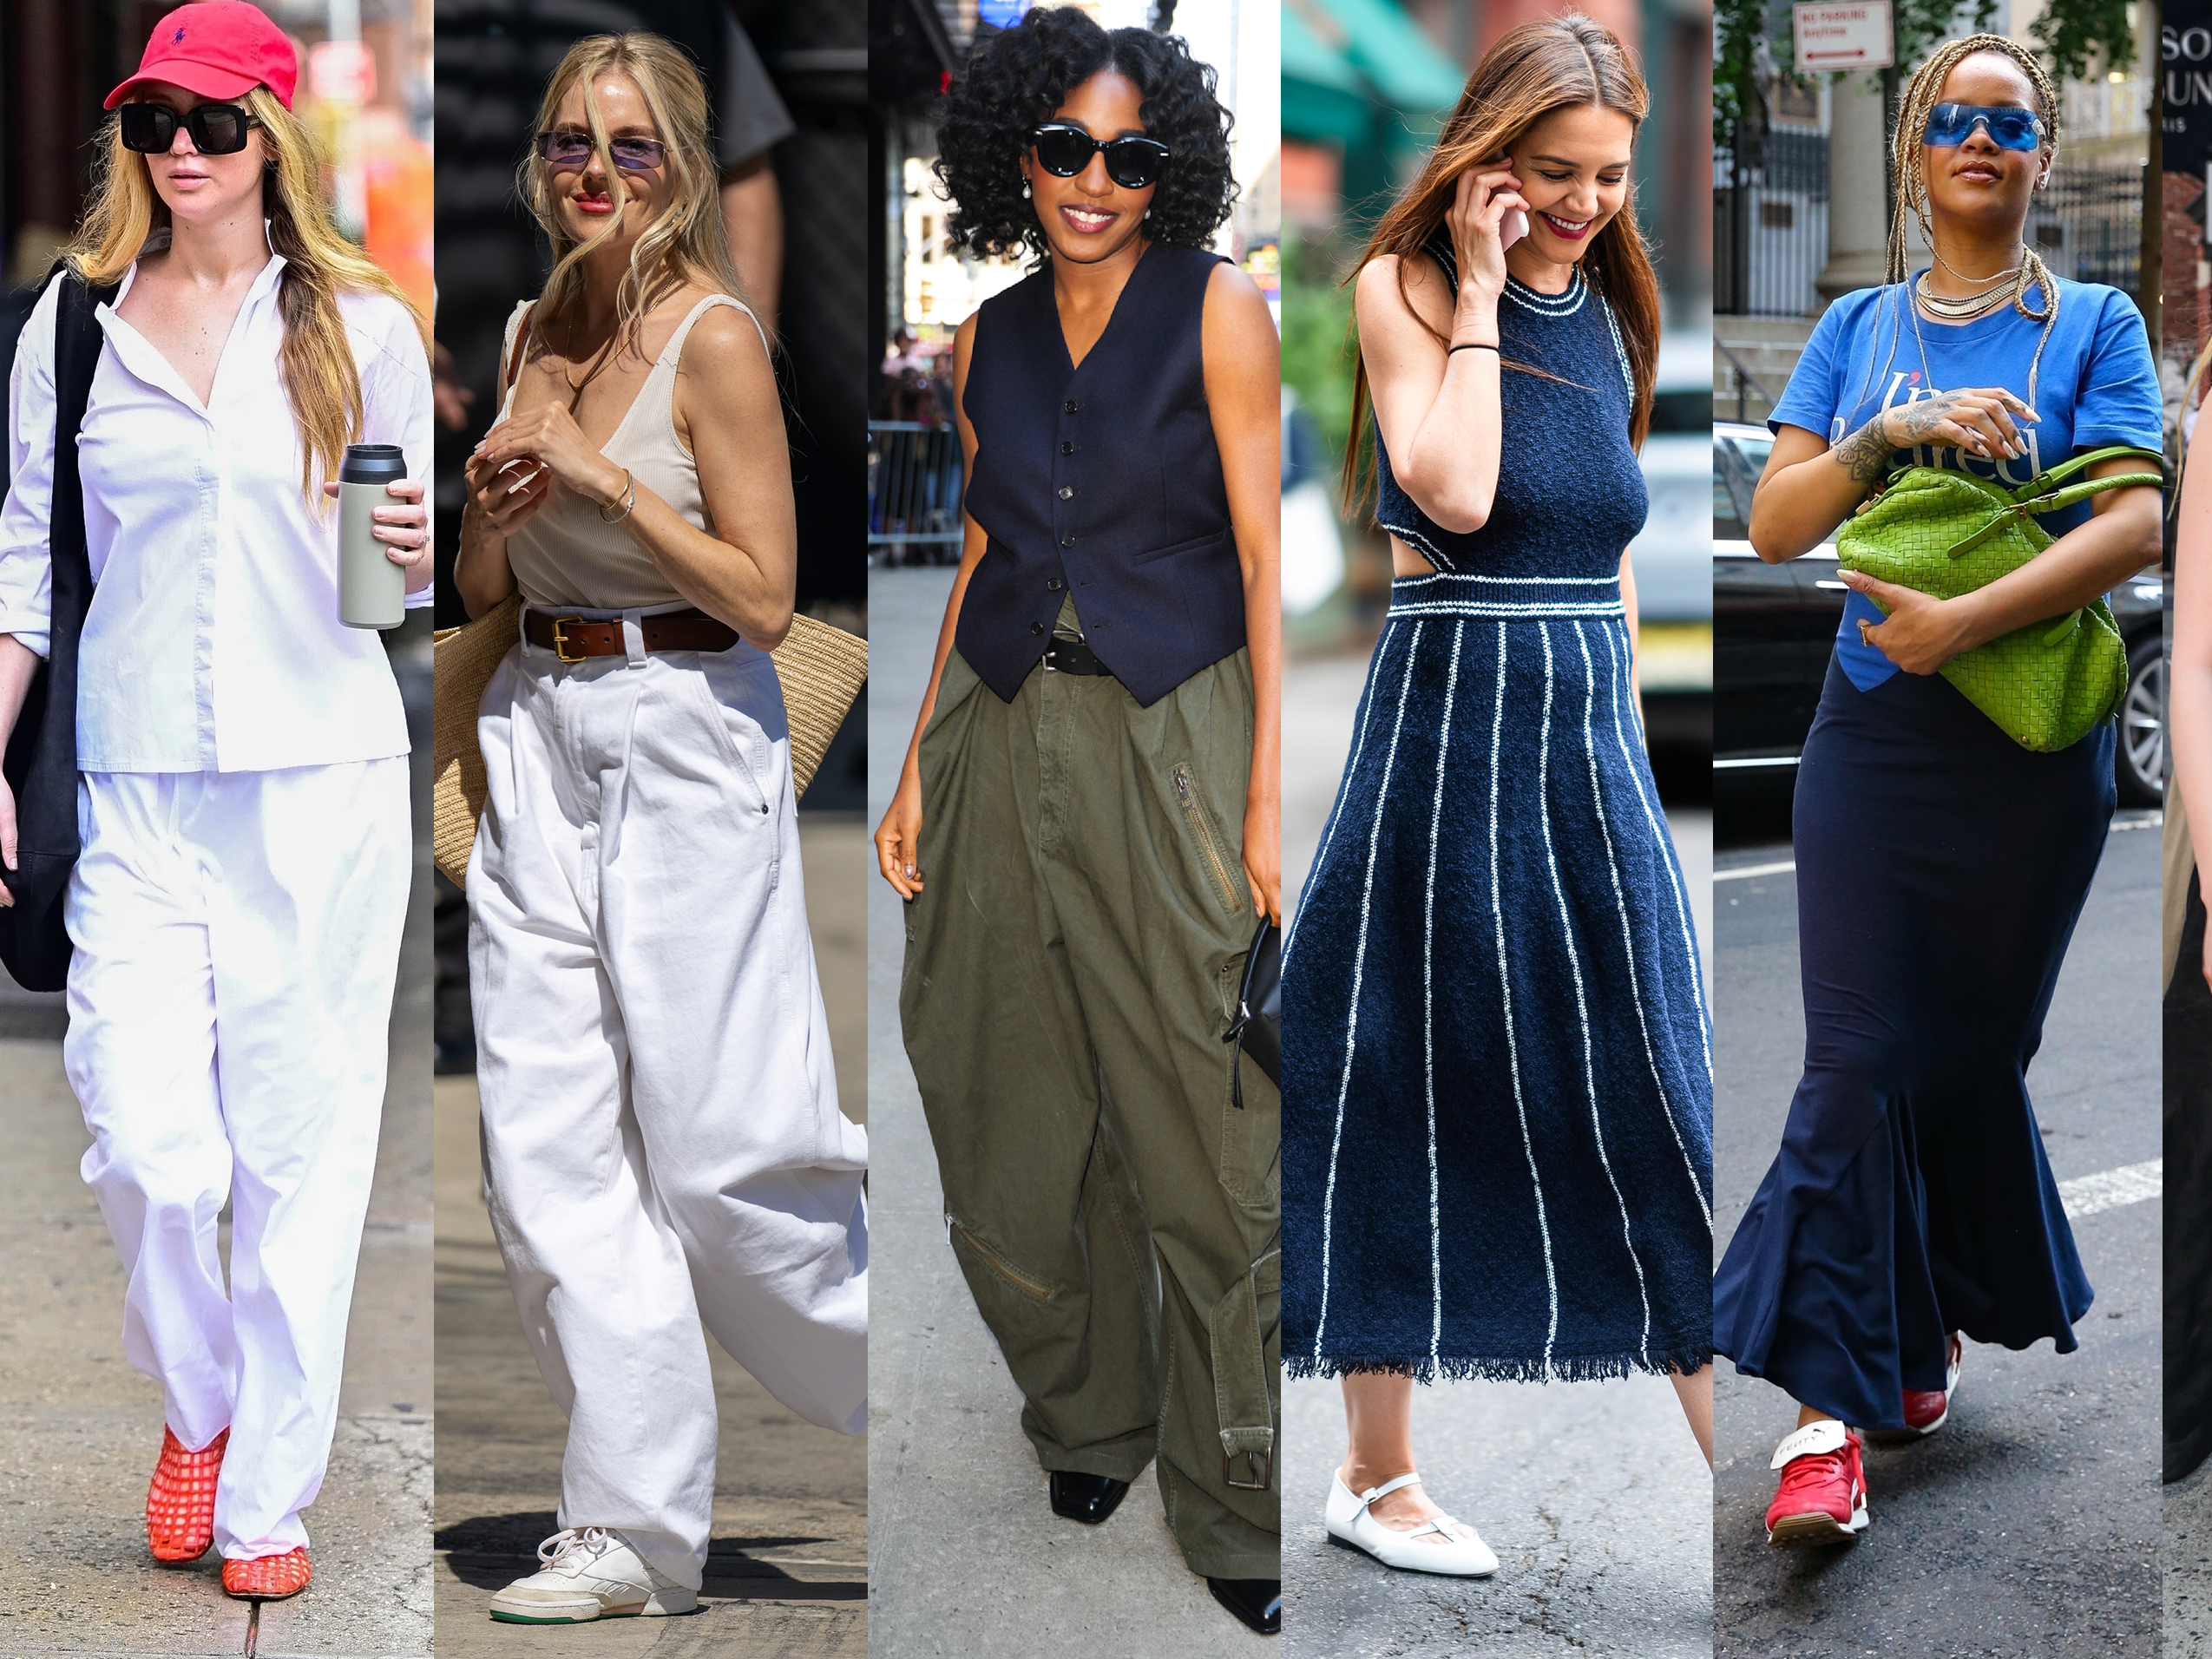 11 Celeb-Inspired Summer Outfits Ideas to Beat the Heat in Style